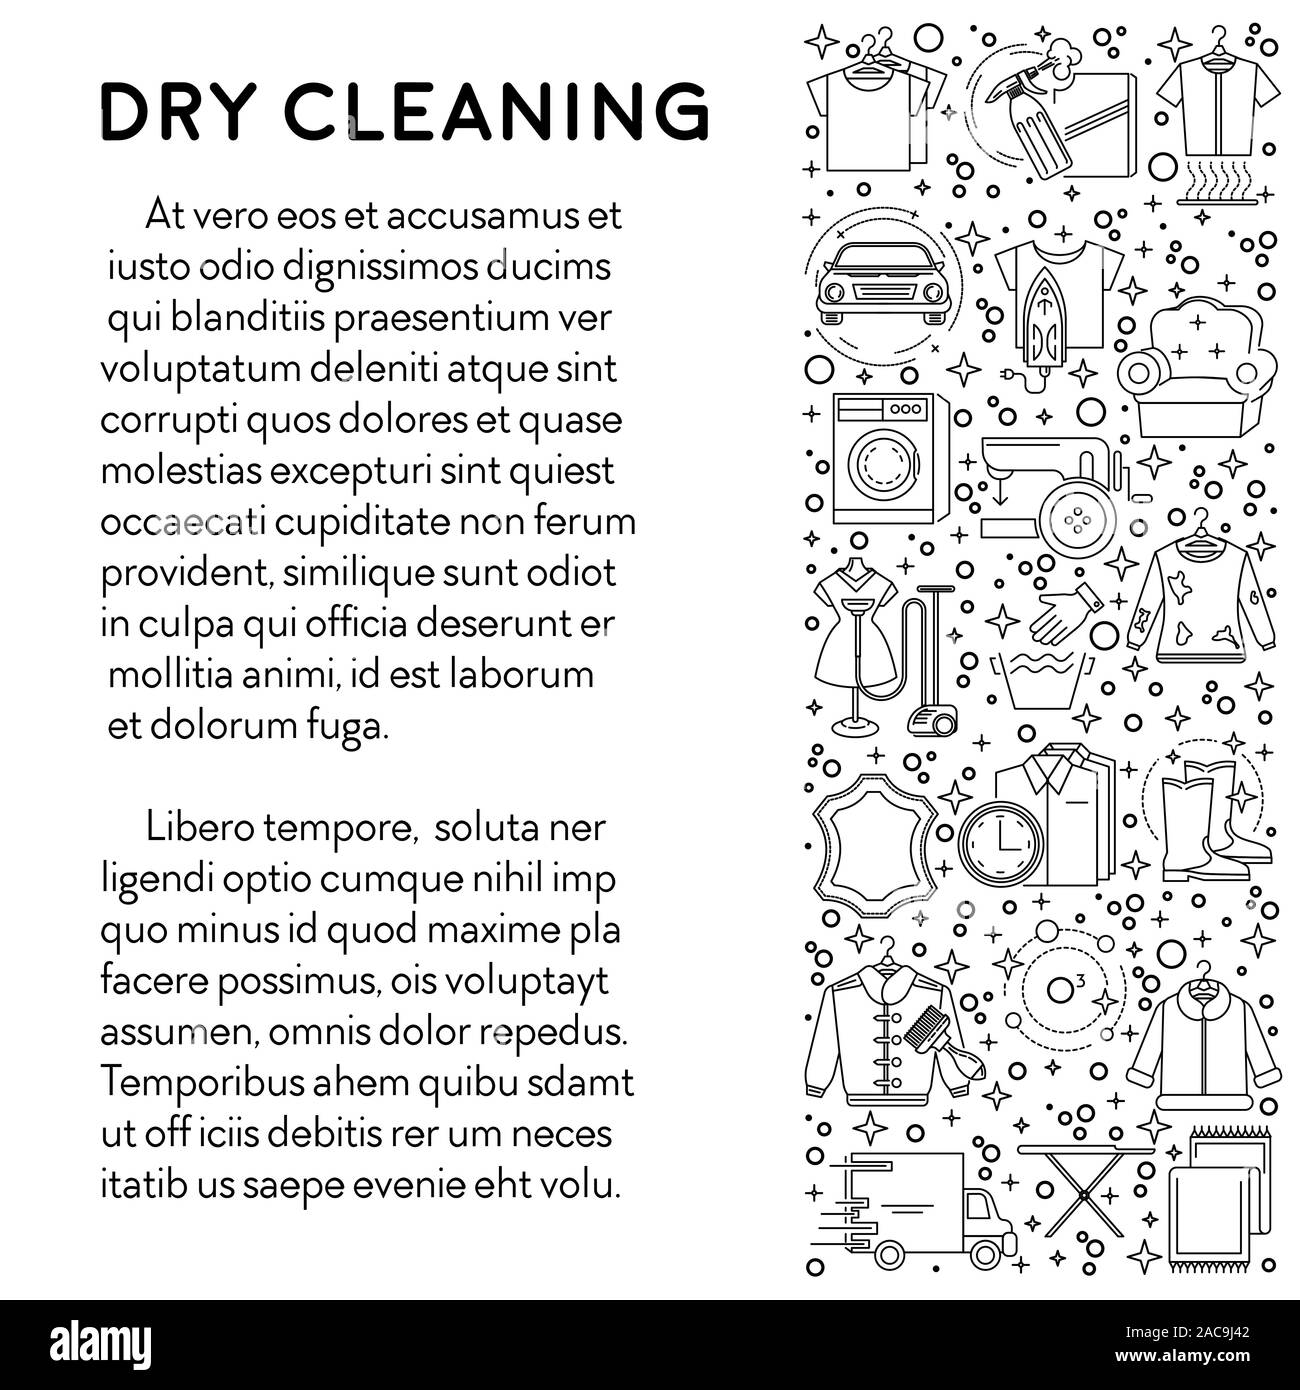 Dry cleaning and laundry service line icons on poster Stock Vector